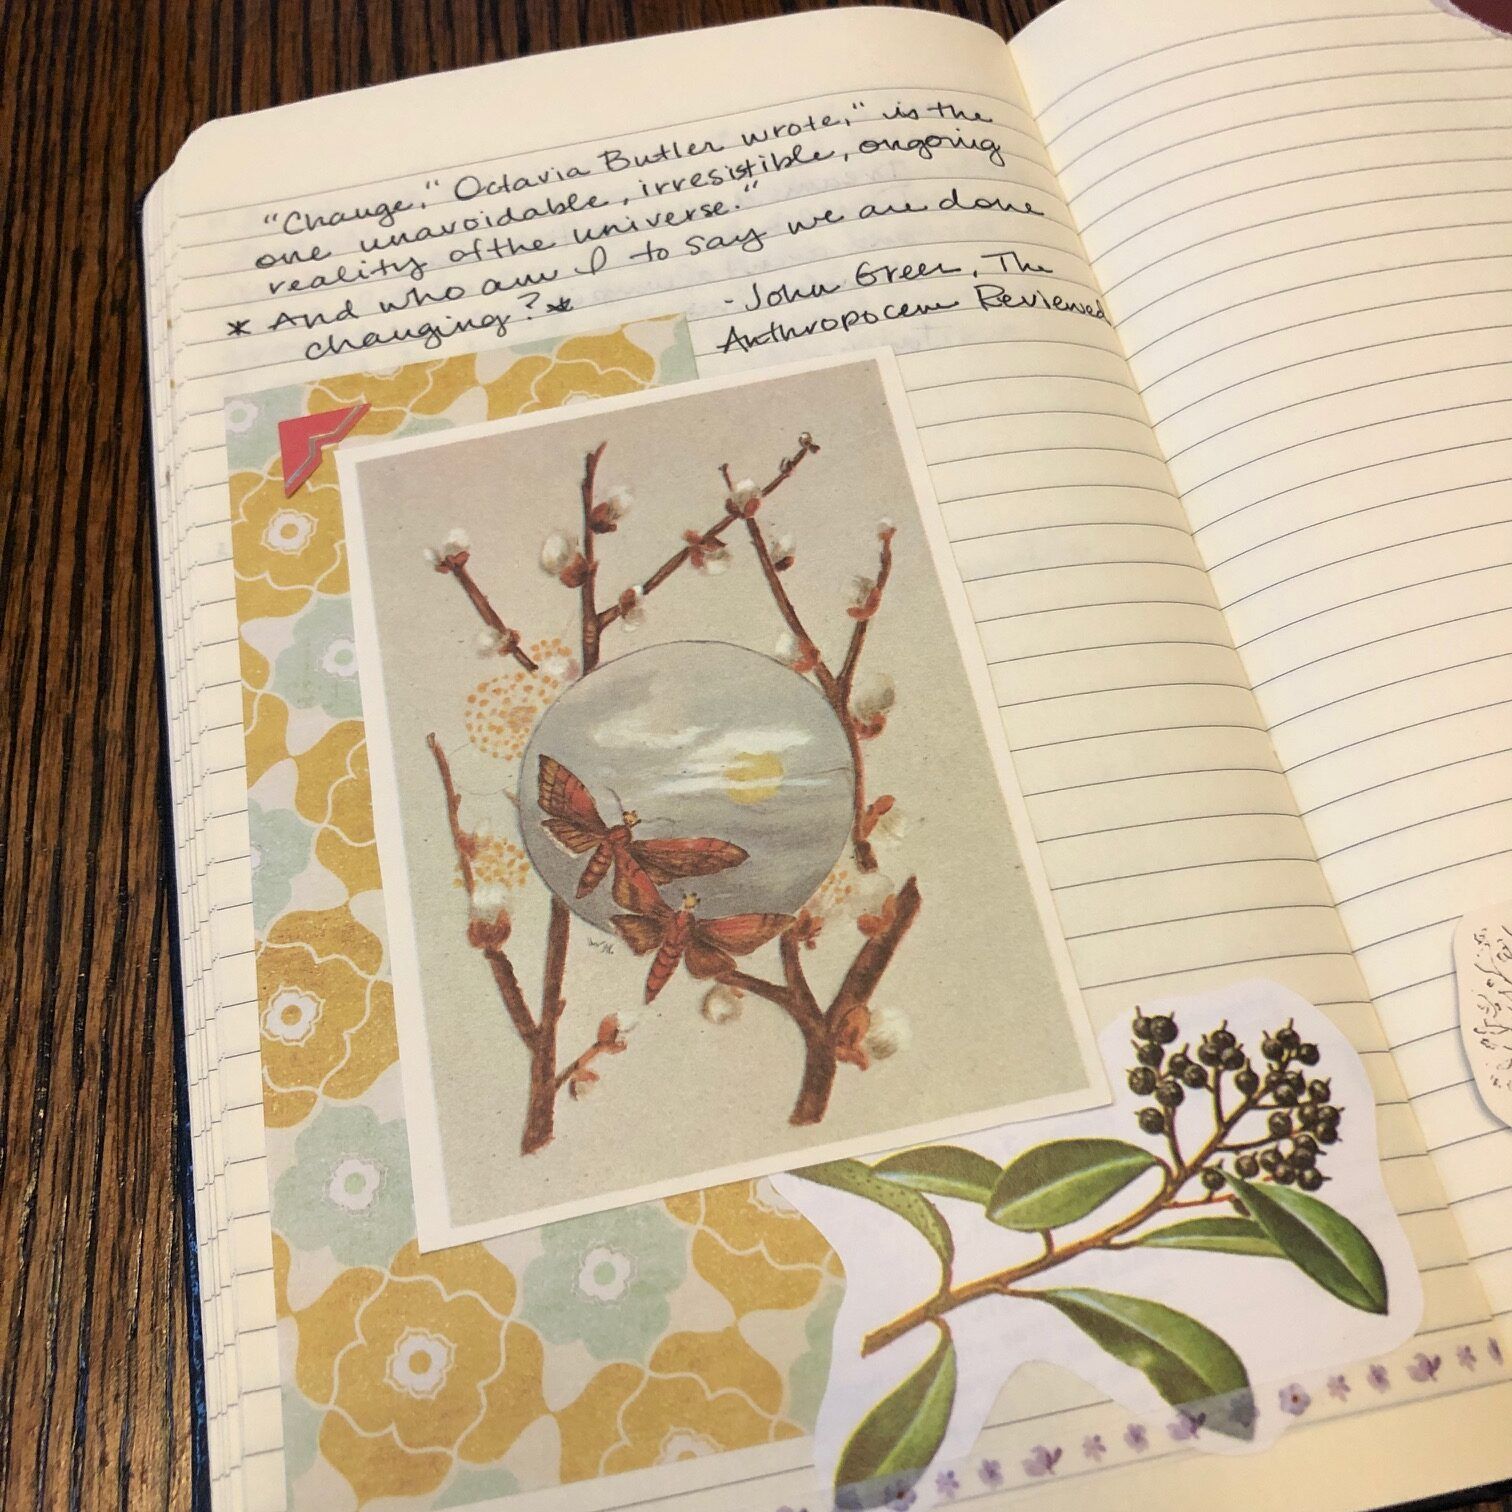 (Photo by Cassie Gutman)

Close-up of finished journal page with patterned papers, a cutout of butterflies, a cutout of a plant, and a quote handwritten messily from The Anthropocene Reviewed.